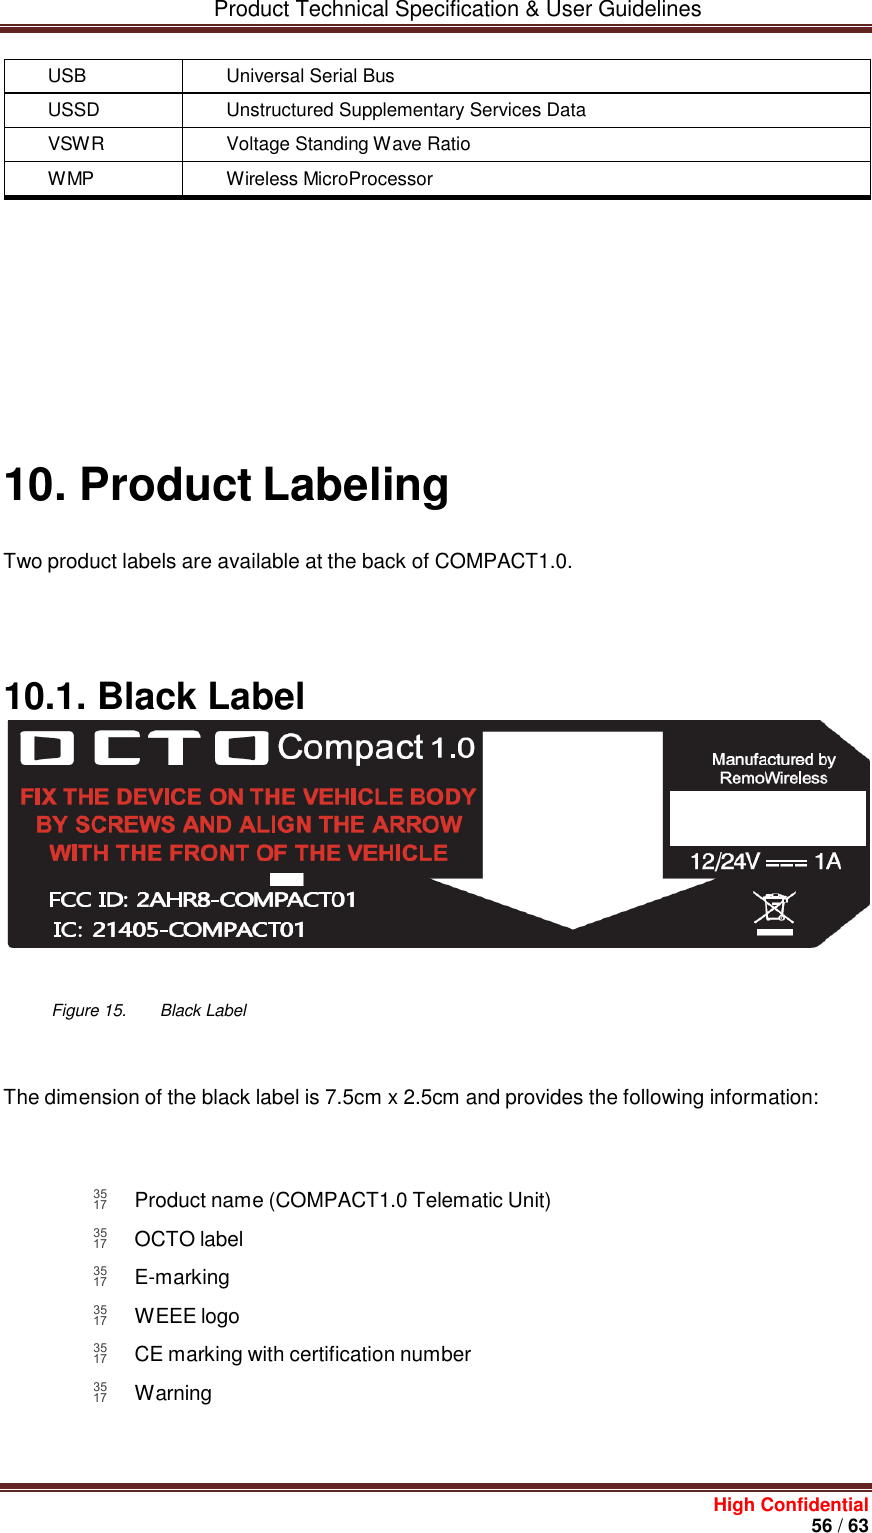         Product Technical Specification &amp; User Guidelines     High Confidential       56 / 63               10. Product Labeling Two product labels are available at the back of COMPACT1.0.  10.1. Black Label              Figure 15.        Black Label   The dimension of the black label is 7.5cm x 2.5cm and provides the following information:     Product name (COMPACT1.0 Telematic Unit)  OCTO label  E-marking  WEEE logo  CE marking with certification number  Warning    USB Universal Serial Bus USSD Unstructured Supplementary Services Data VSWR Voltage Standing Wave Ratio WMP Wireless MicroProcessor 